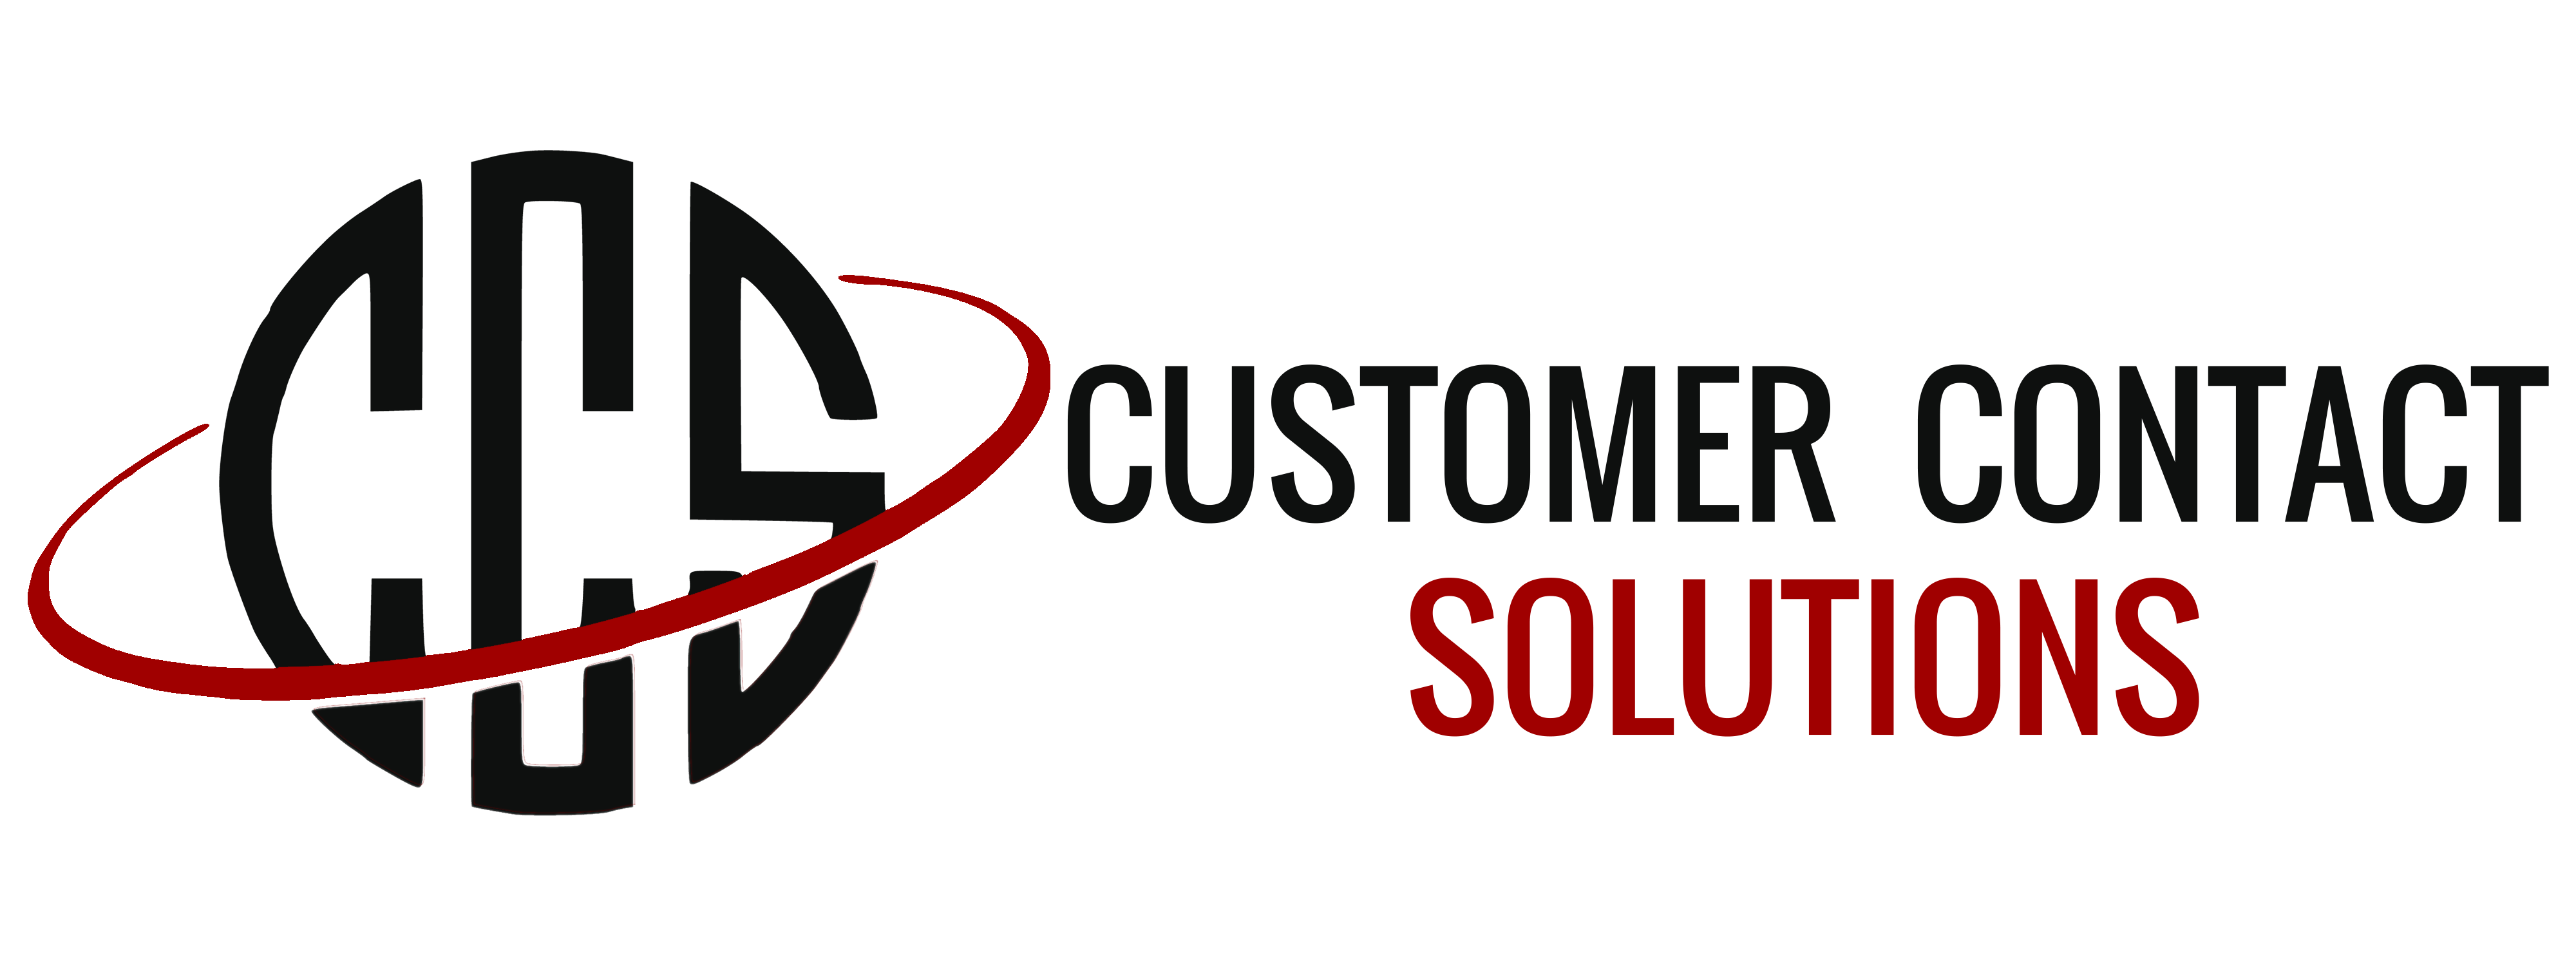 Customer Contact Solutions USA Gateway